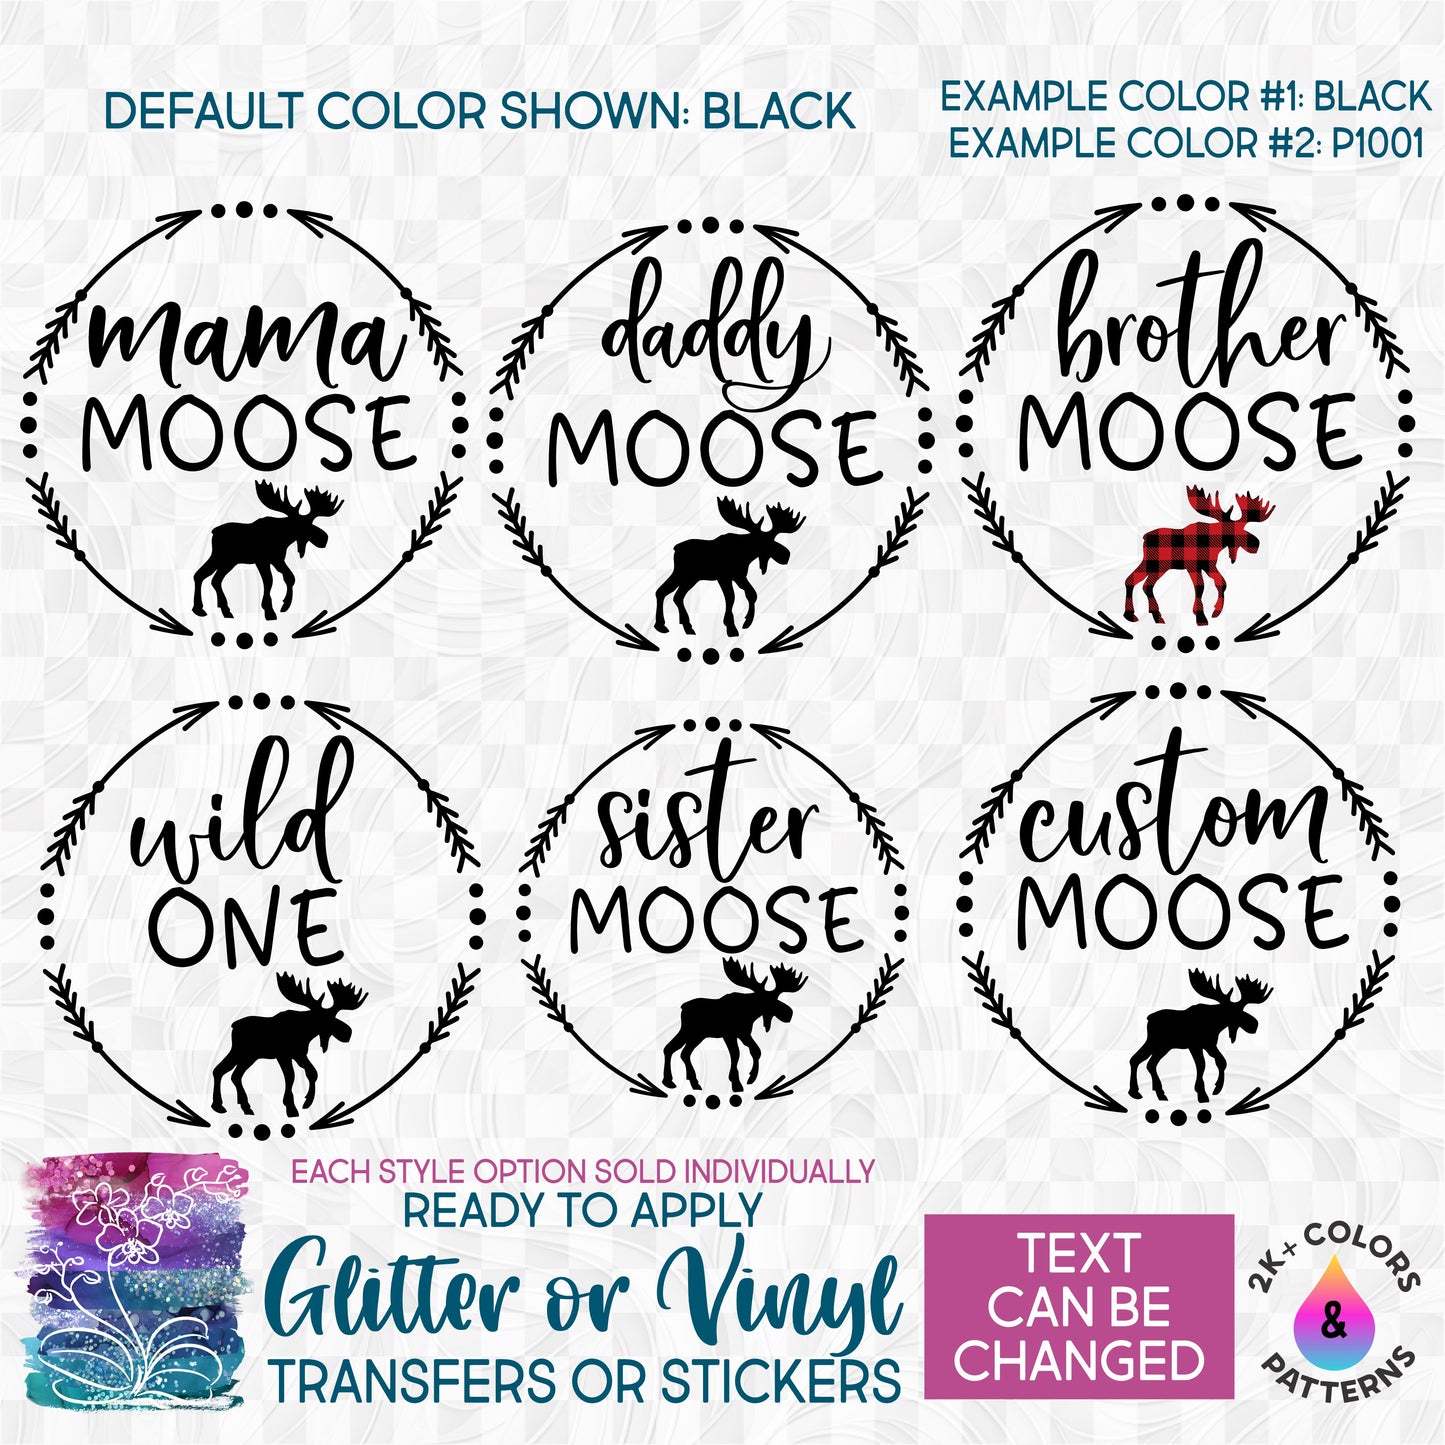 s333-3 Moose Family Mama Papa Baby Brother Sister Big Little Cousin Custom Text Made-to-Order Iron-On Transfer or Sticker